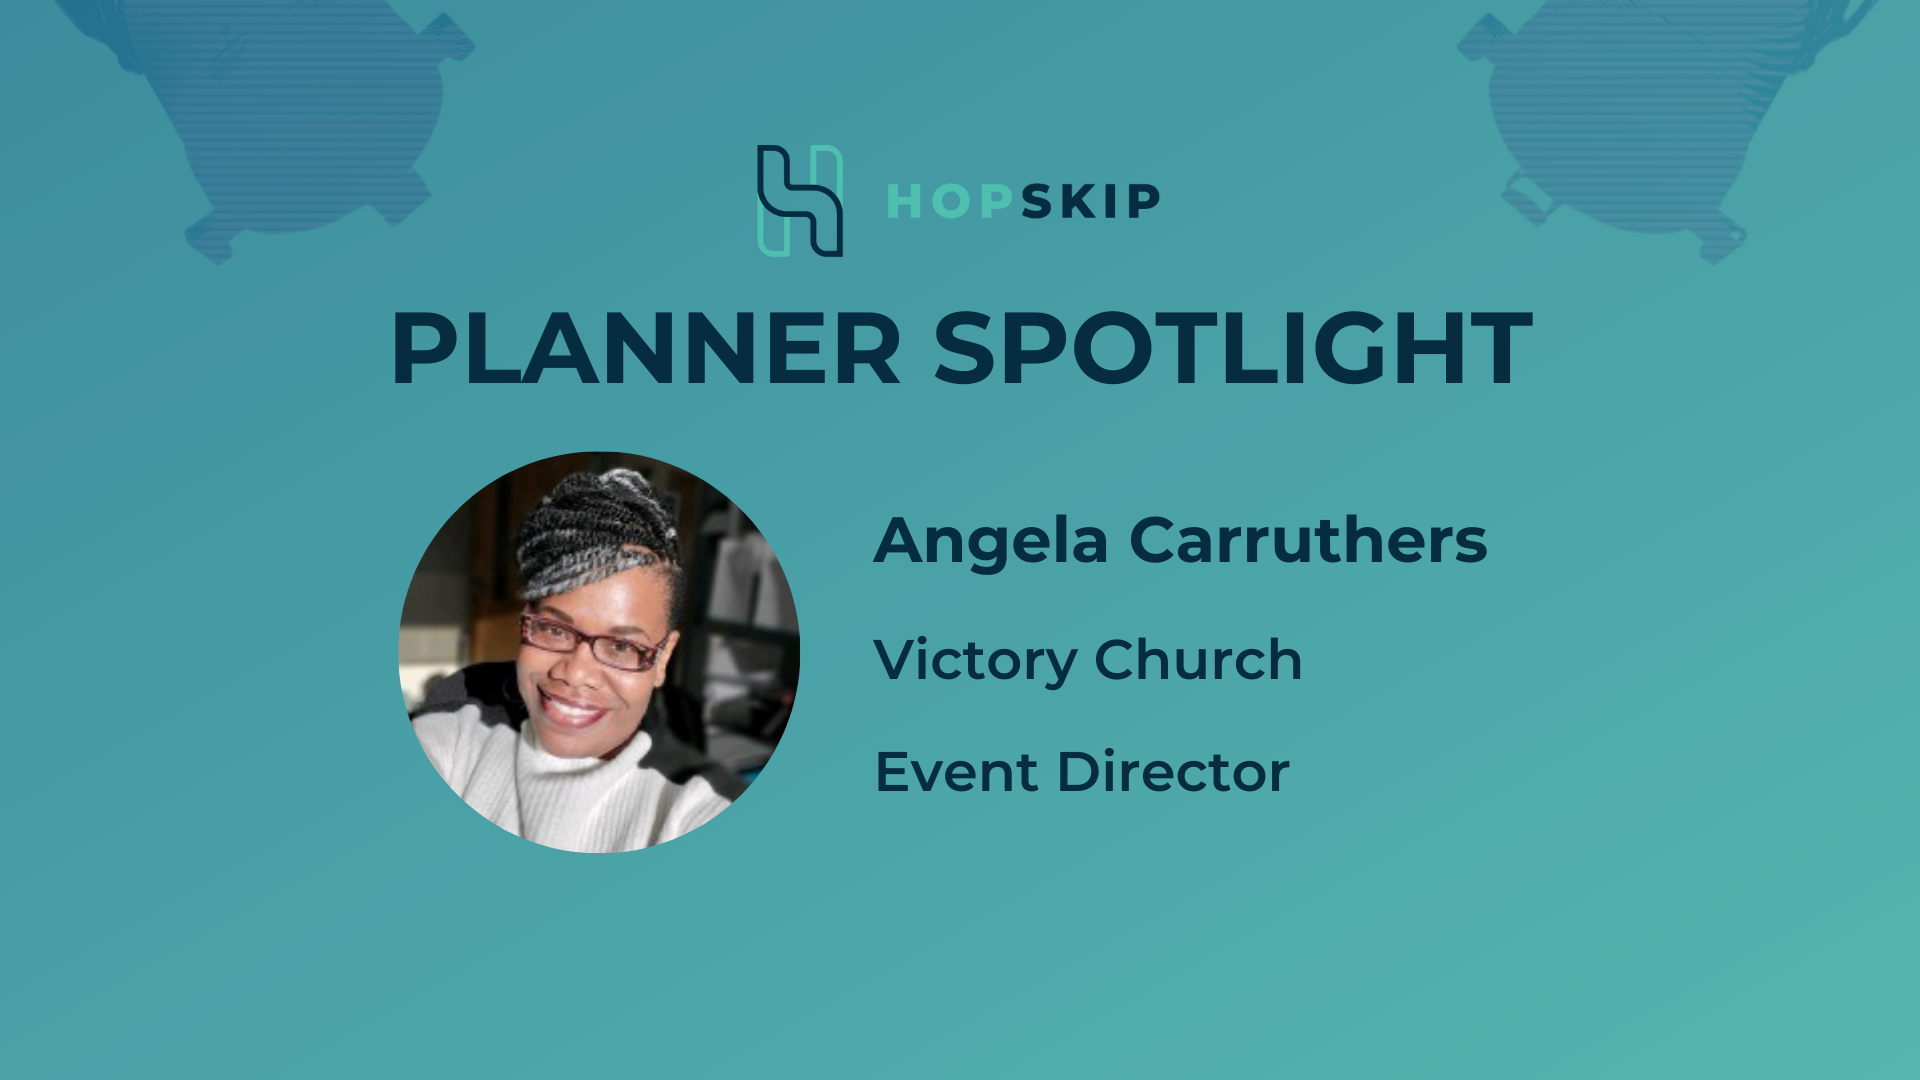 HopSkip Planner Spotlight- Angela Carruthers from Victory Church